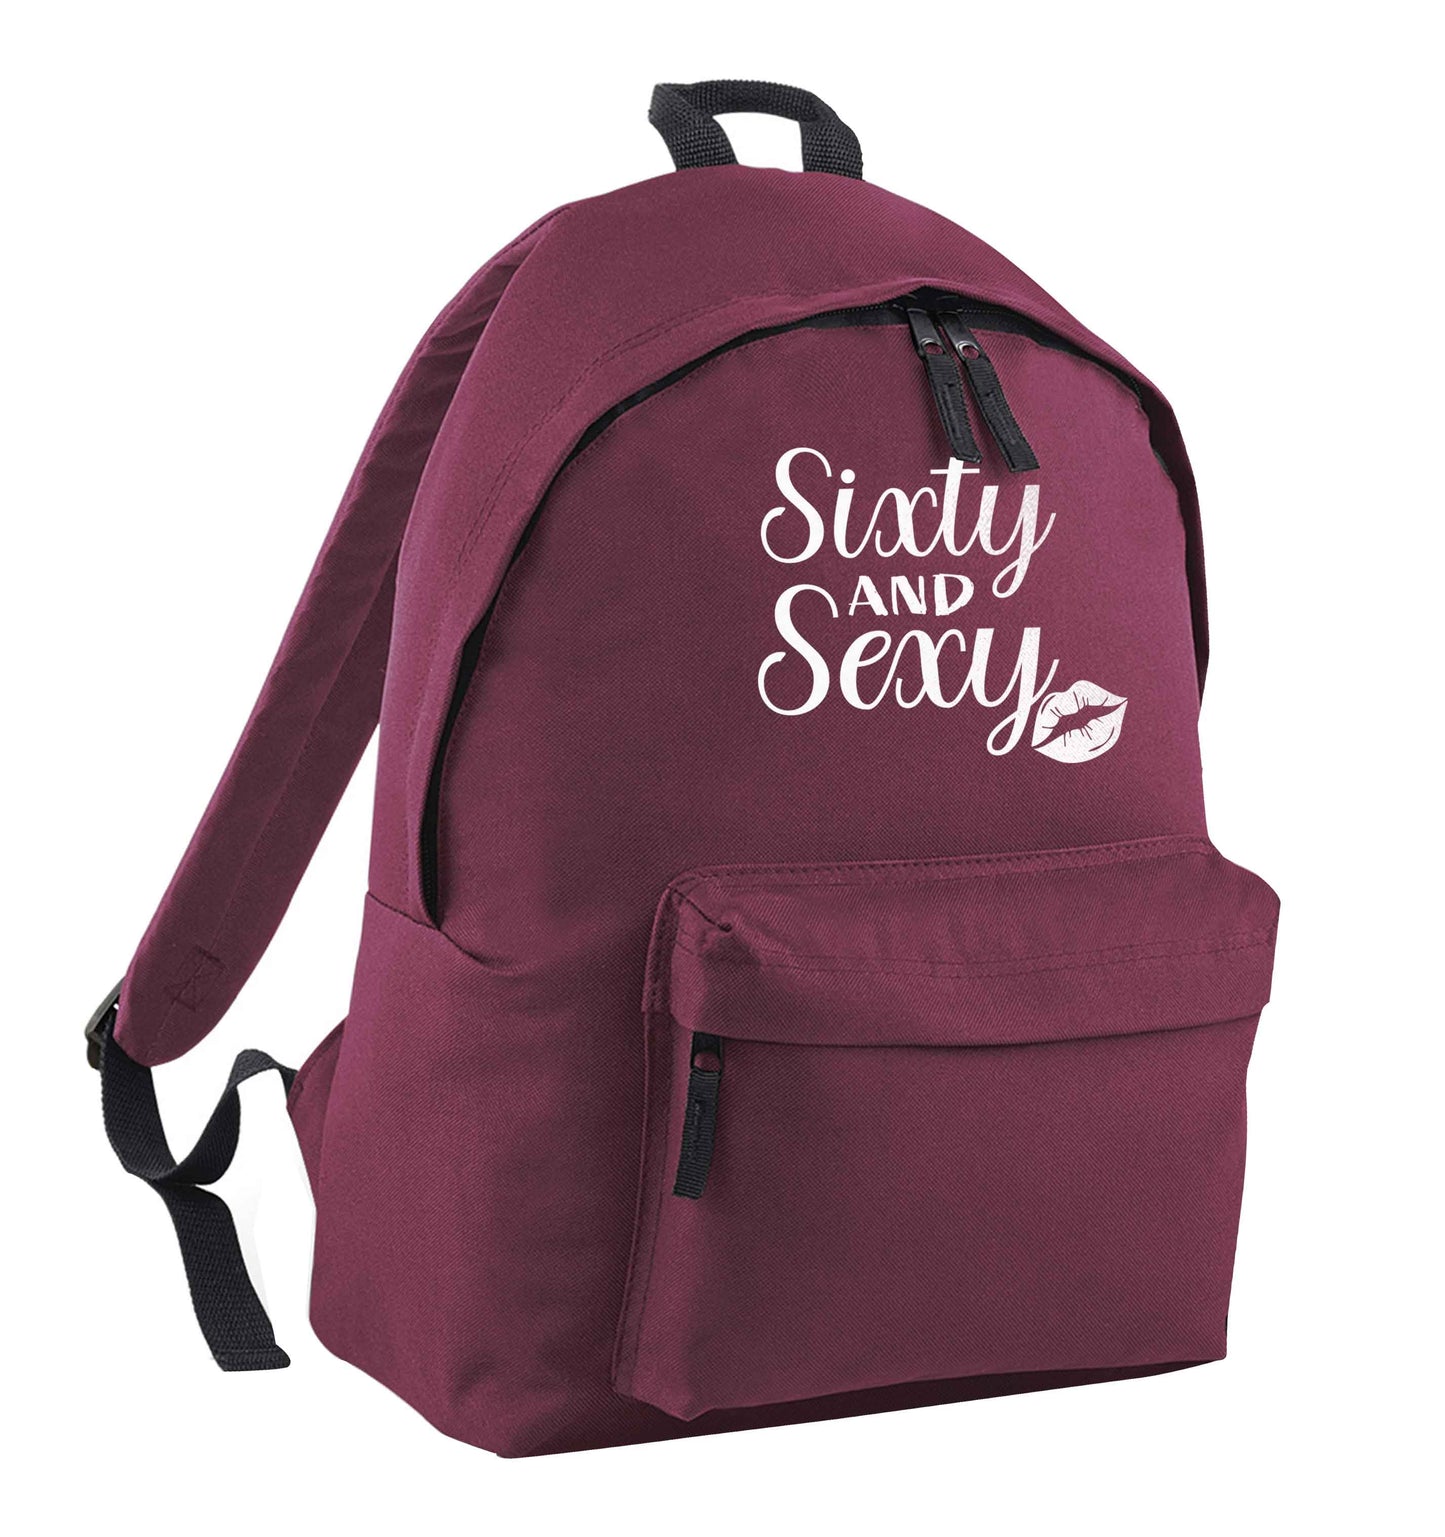 Sixty and sexy maroon adults backpack